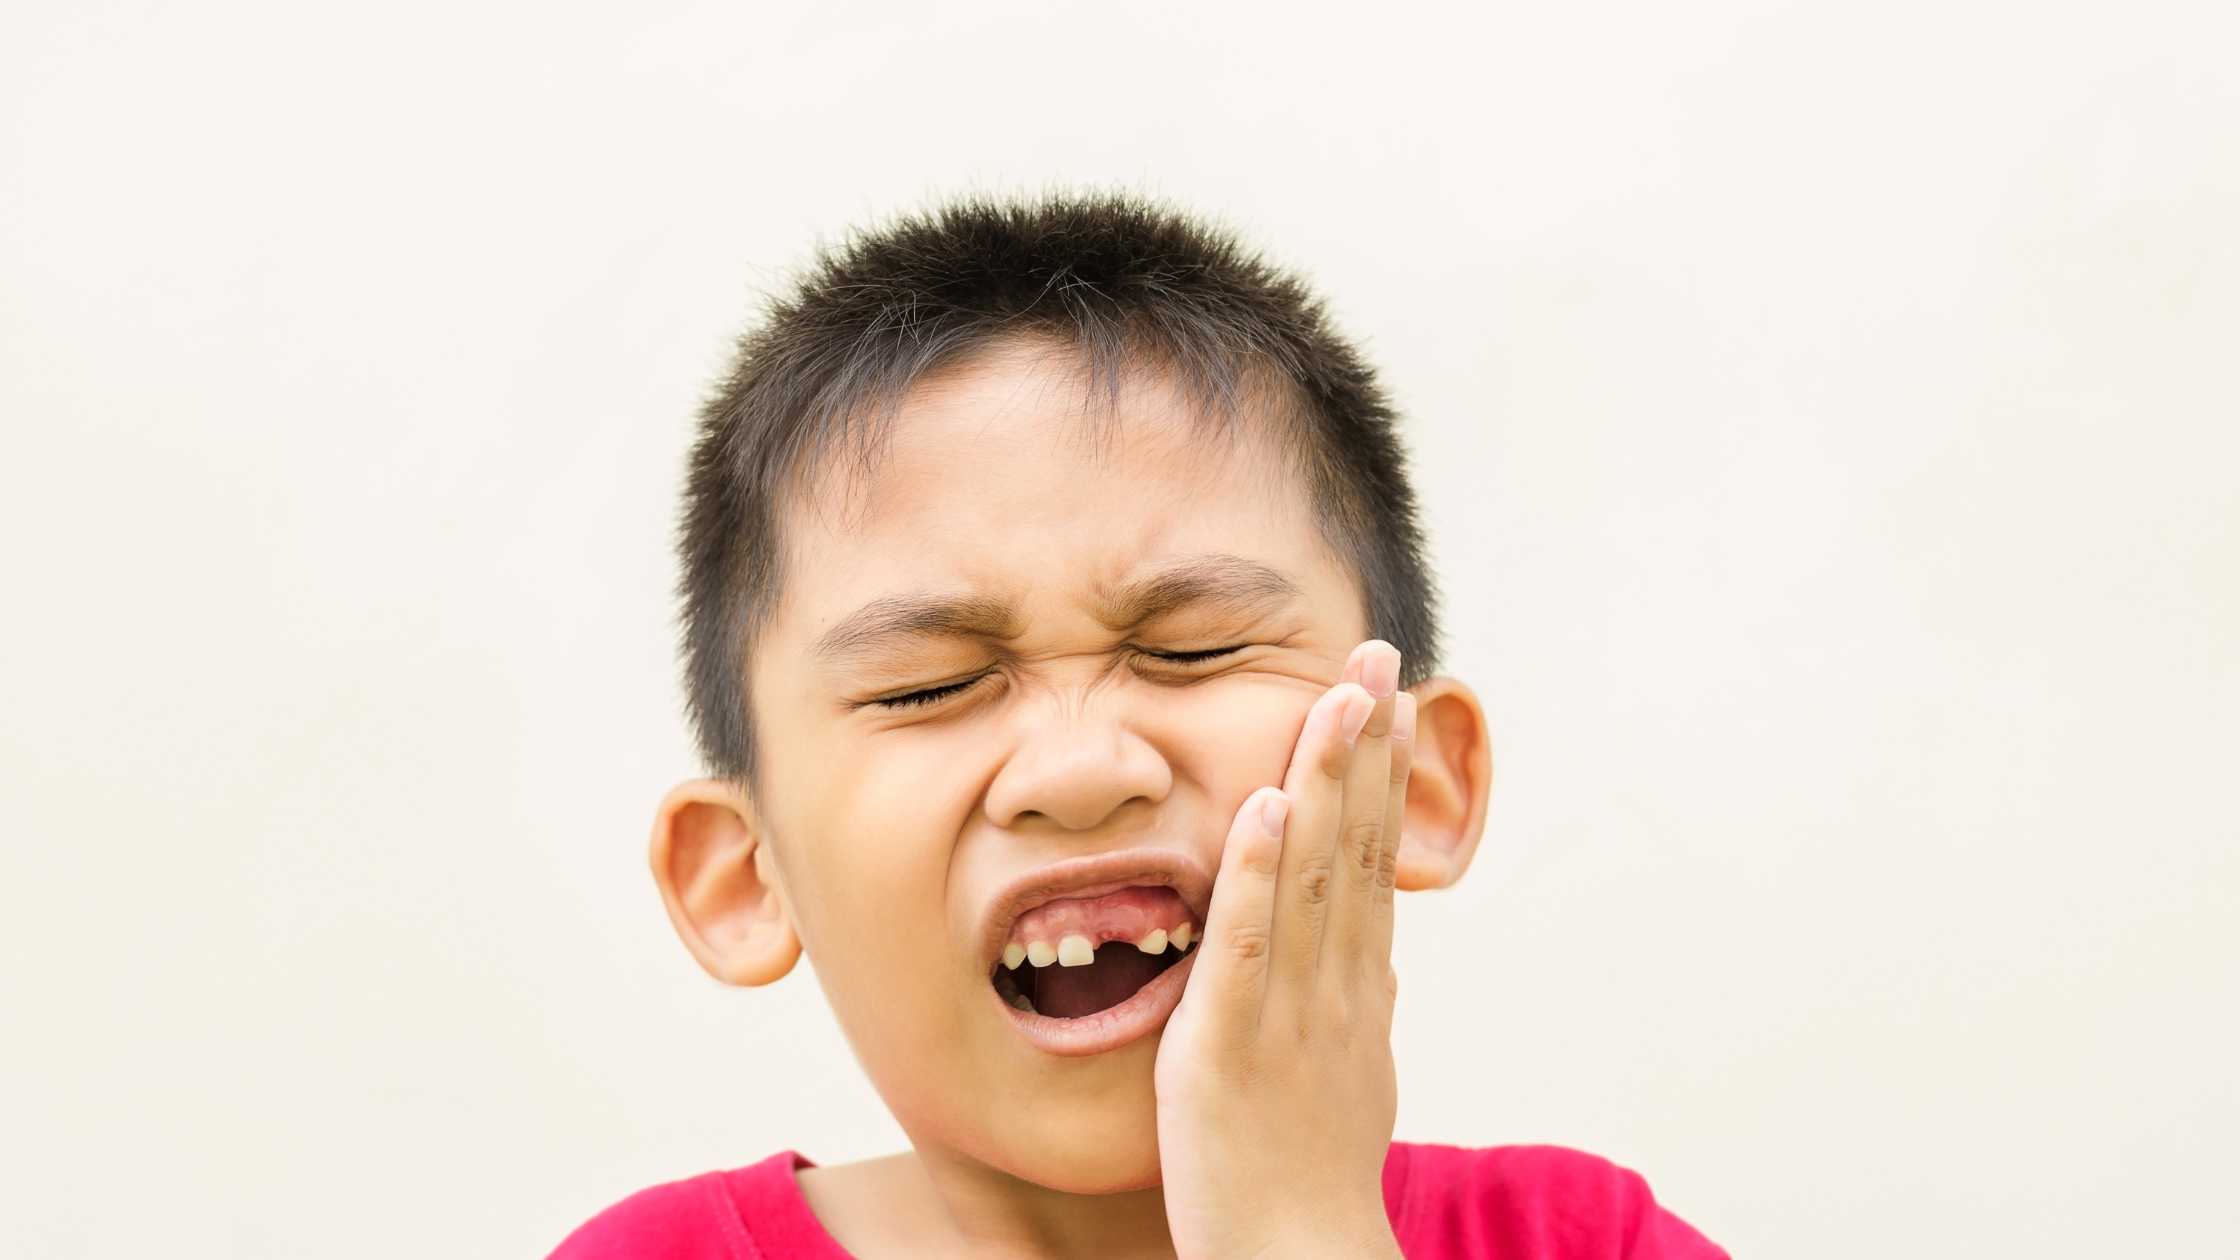 How to Handle Child's Dental Emergency